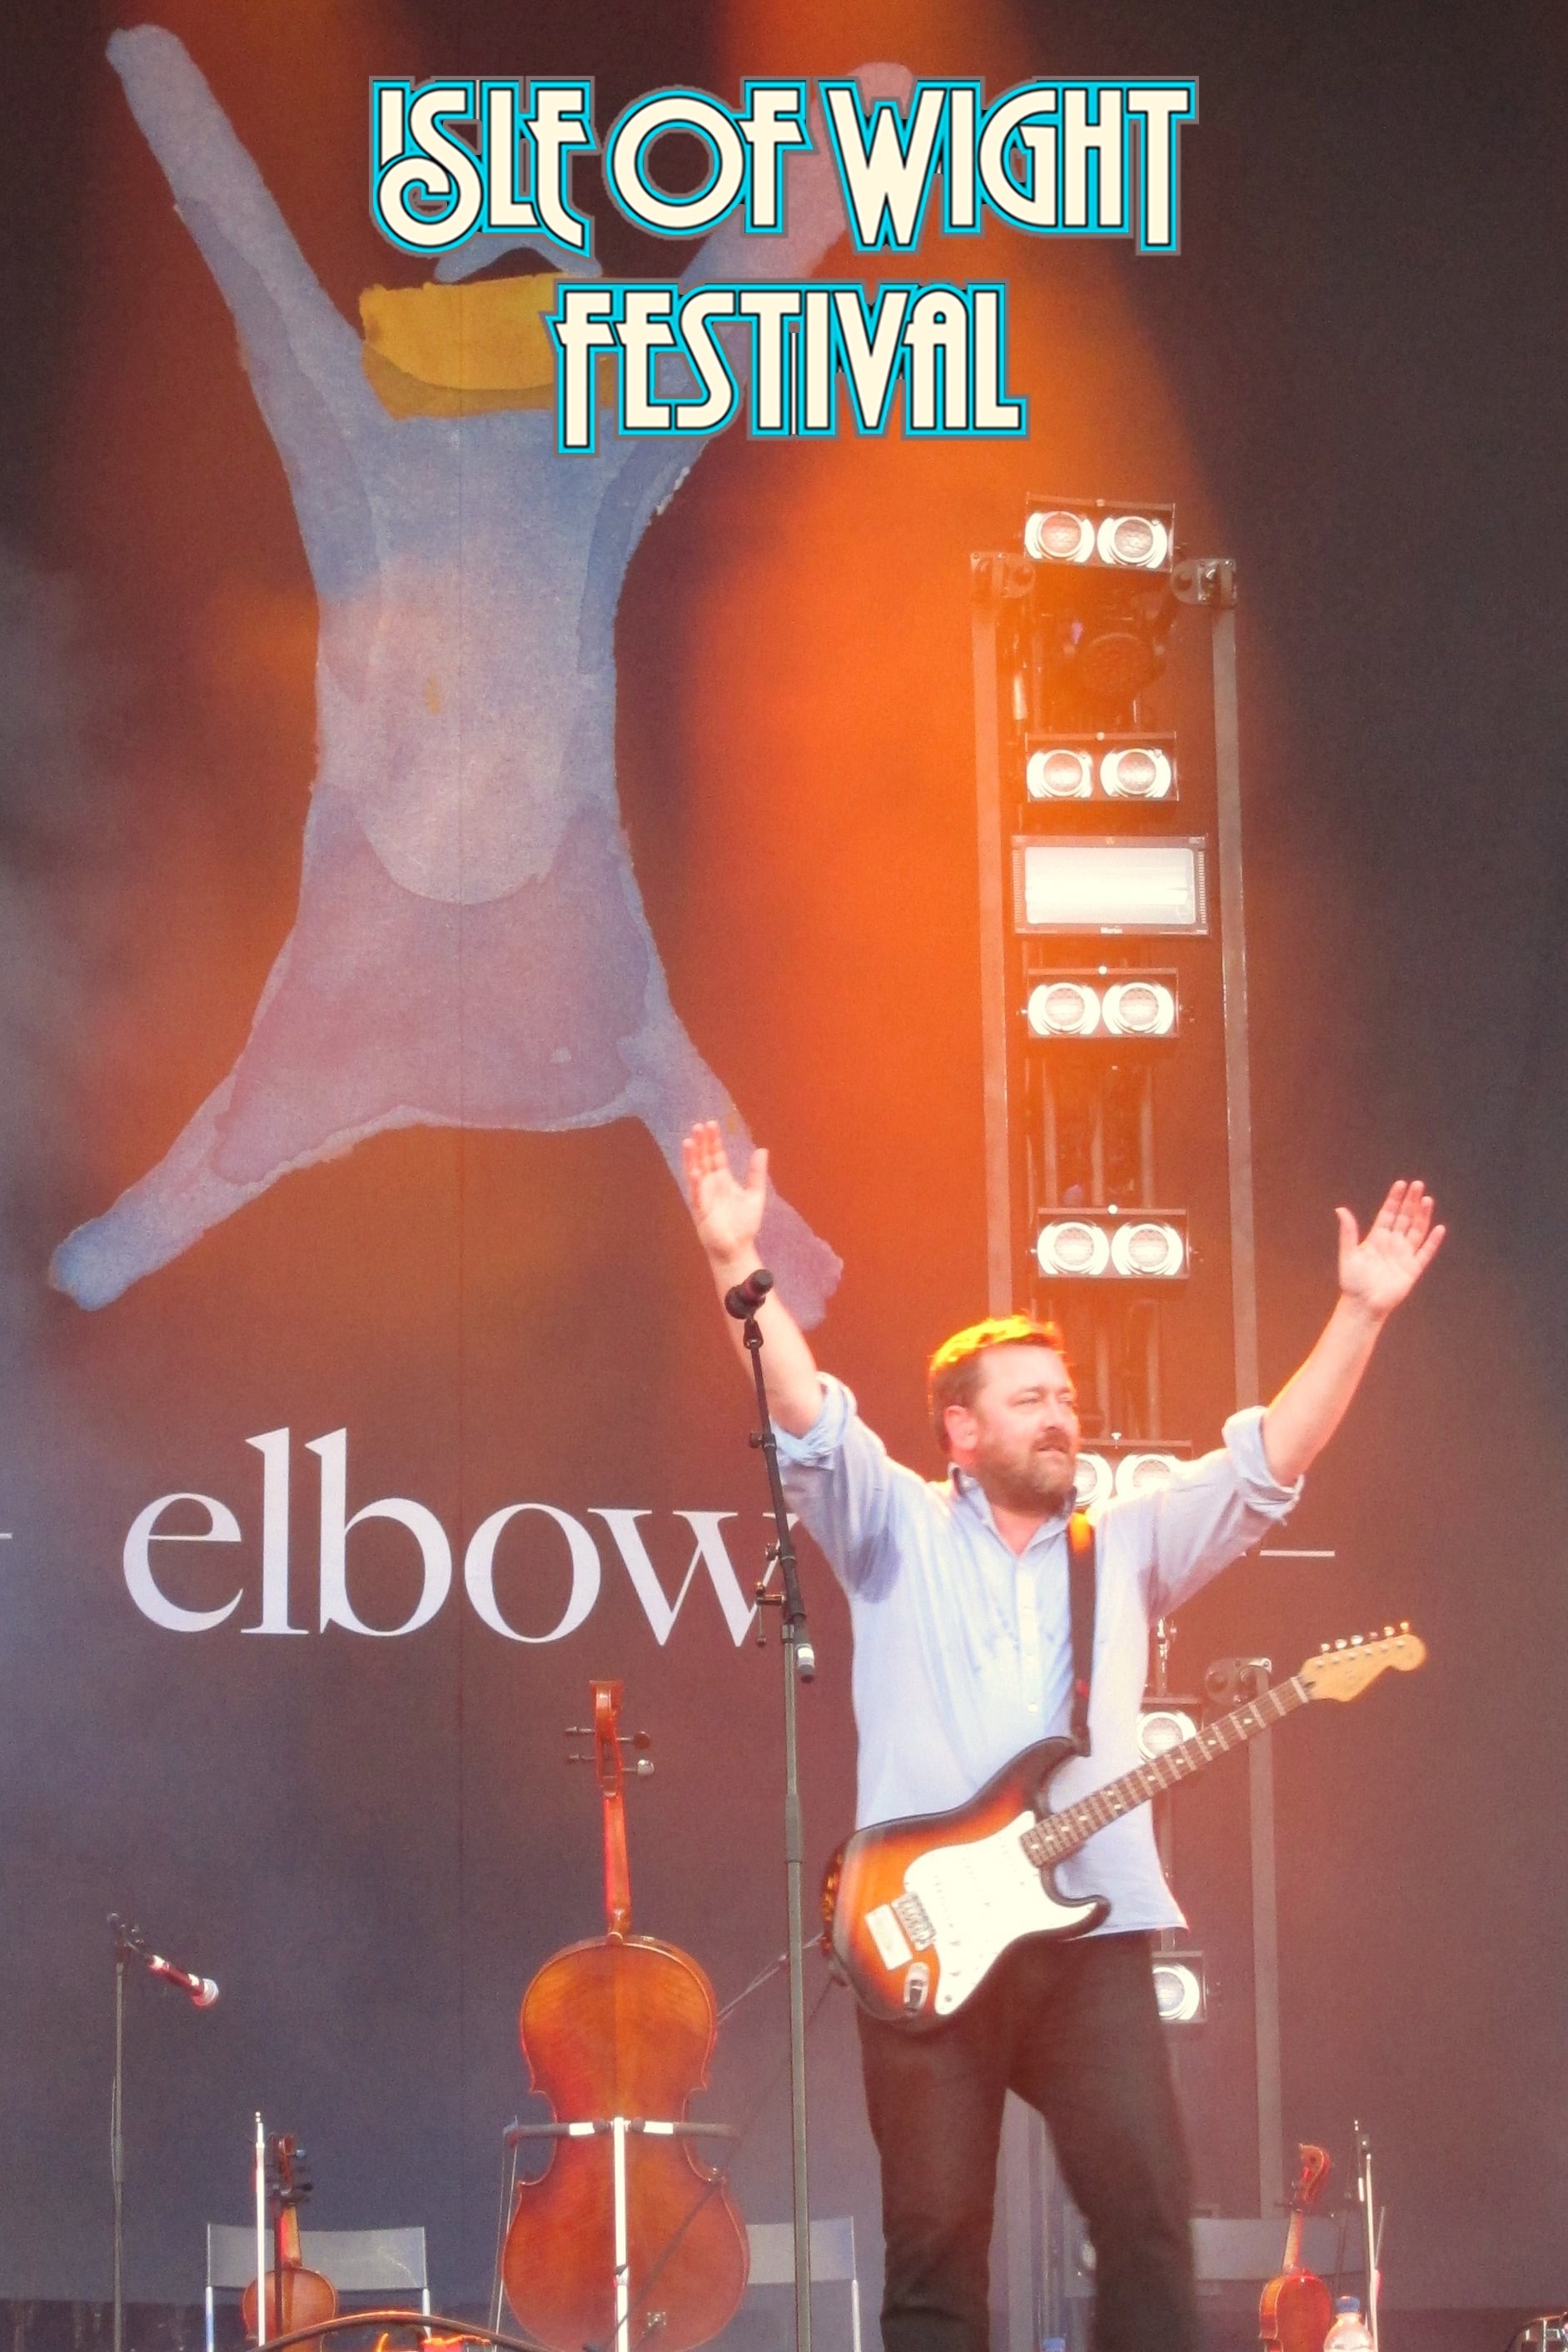 Elbow - Isle of Wight 2012